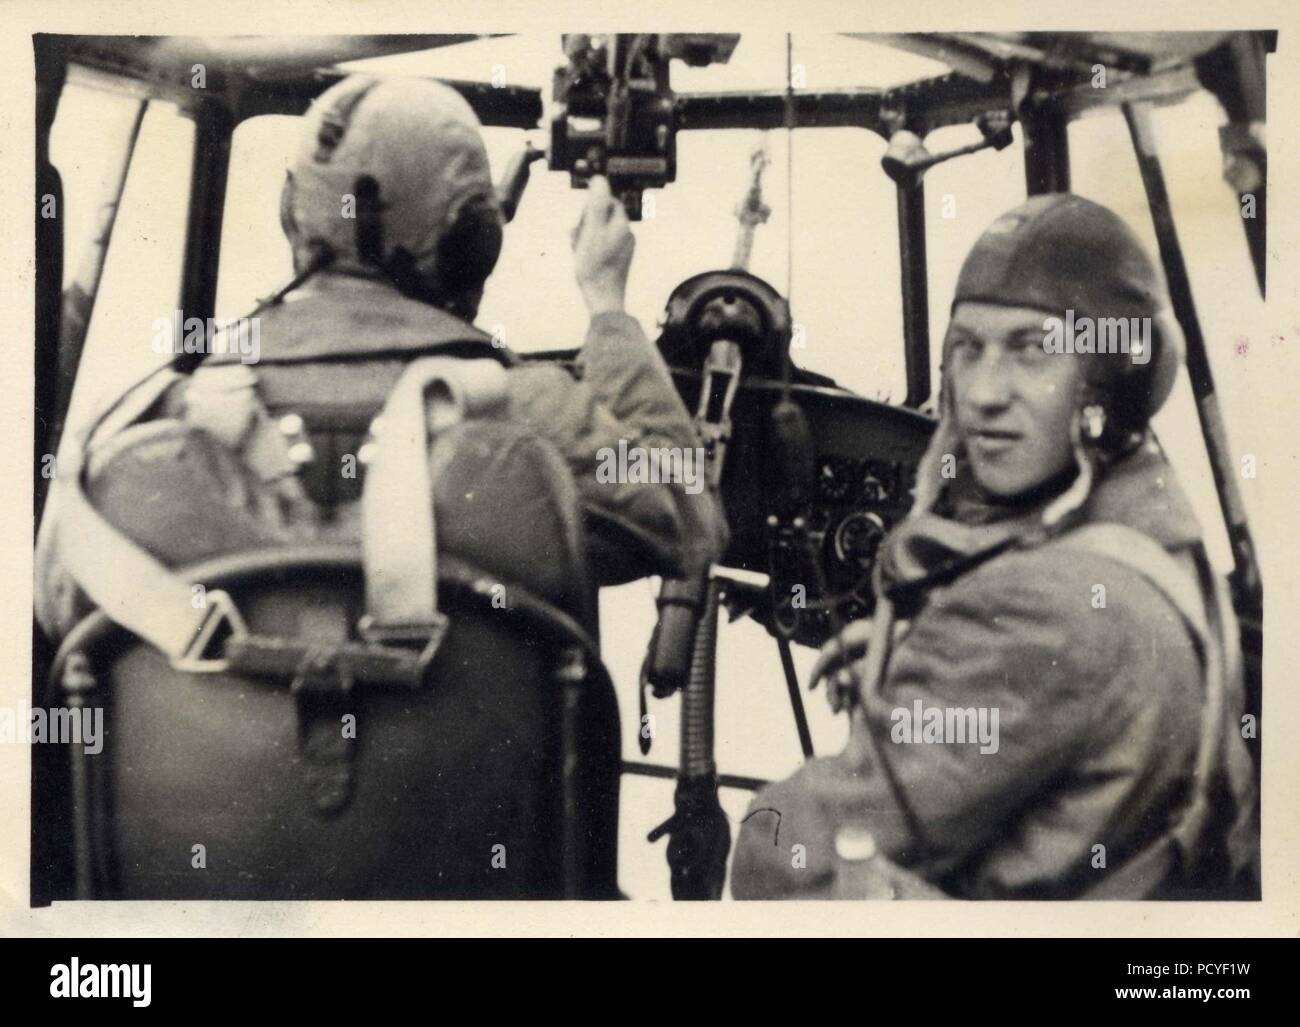 Image from the photo album of Oberfeldwebel Gotthilf Benseler of 9. Staffel, Kampfgeschwader 3: The Observer in a Dornier Do 17Z of 9./KG 3 turns towards the camera as his Pilot adjusts his controls. The MG 15 machine-gun used by the Pilot in action is in position for their mission. Poland, September 1939. Stock Photo